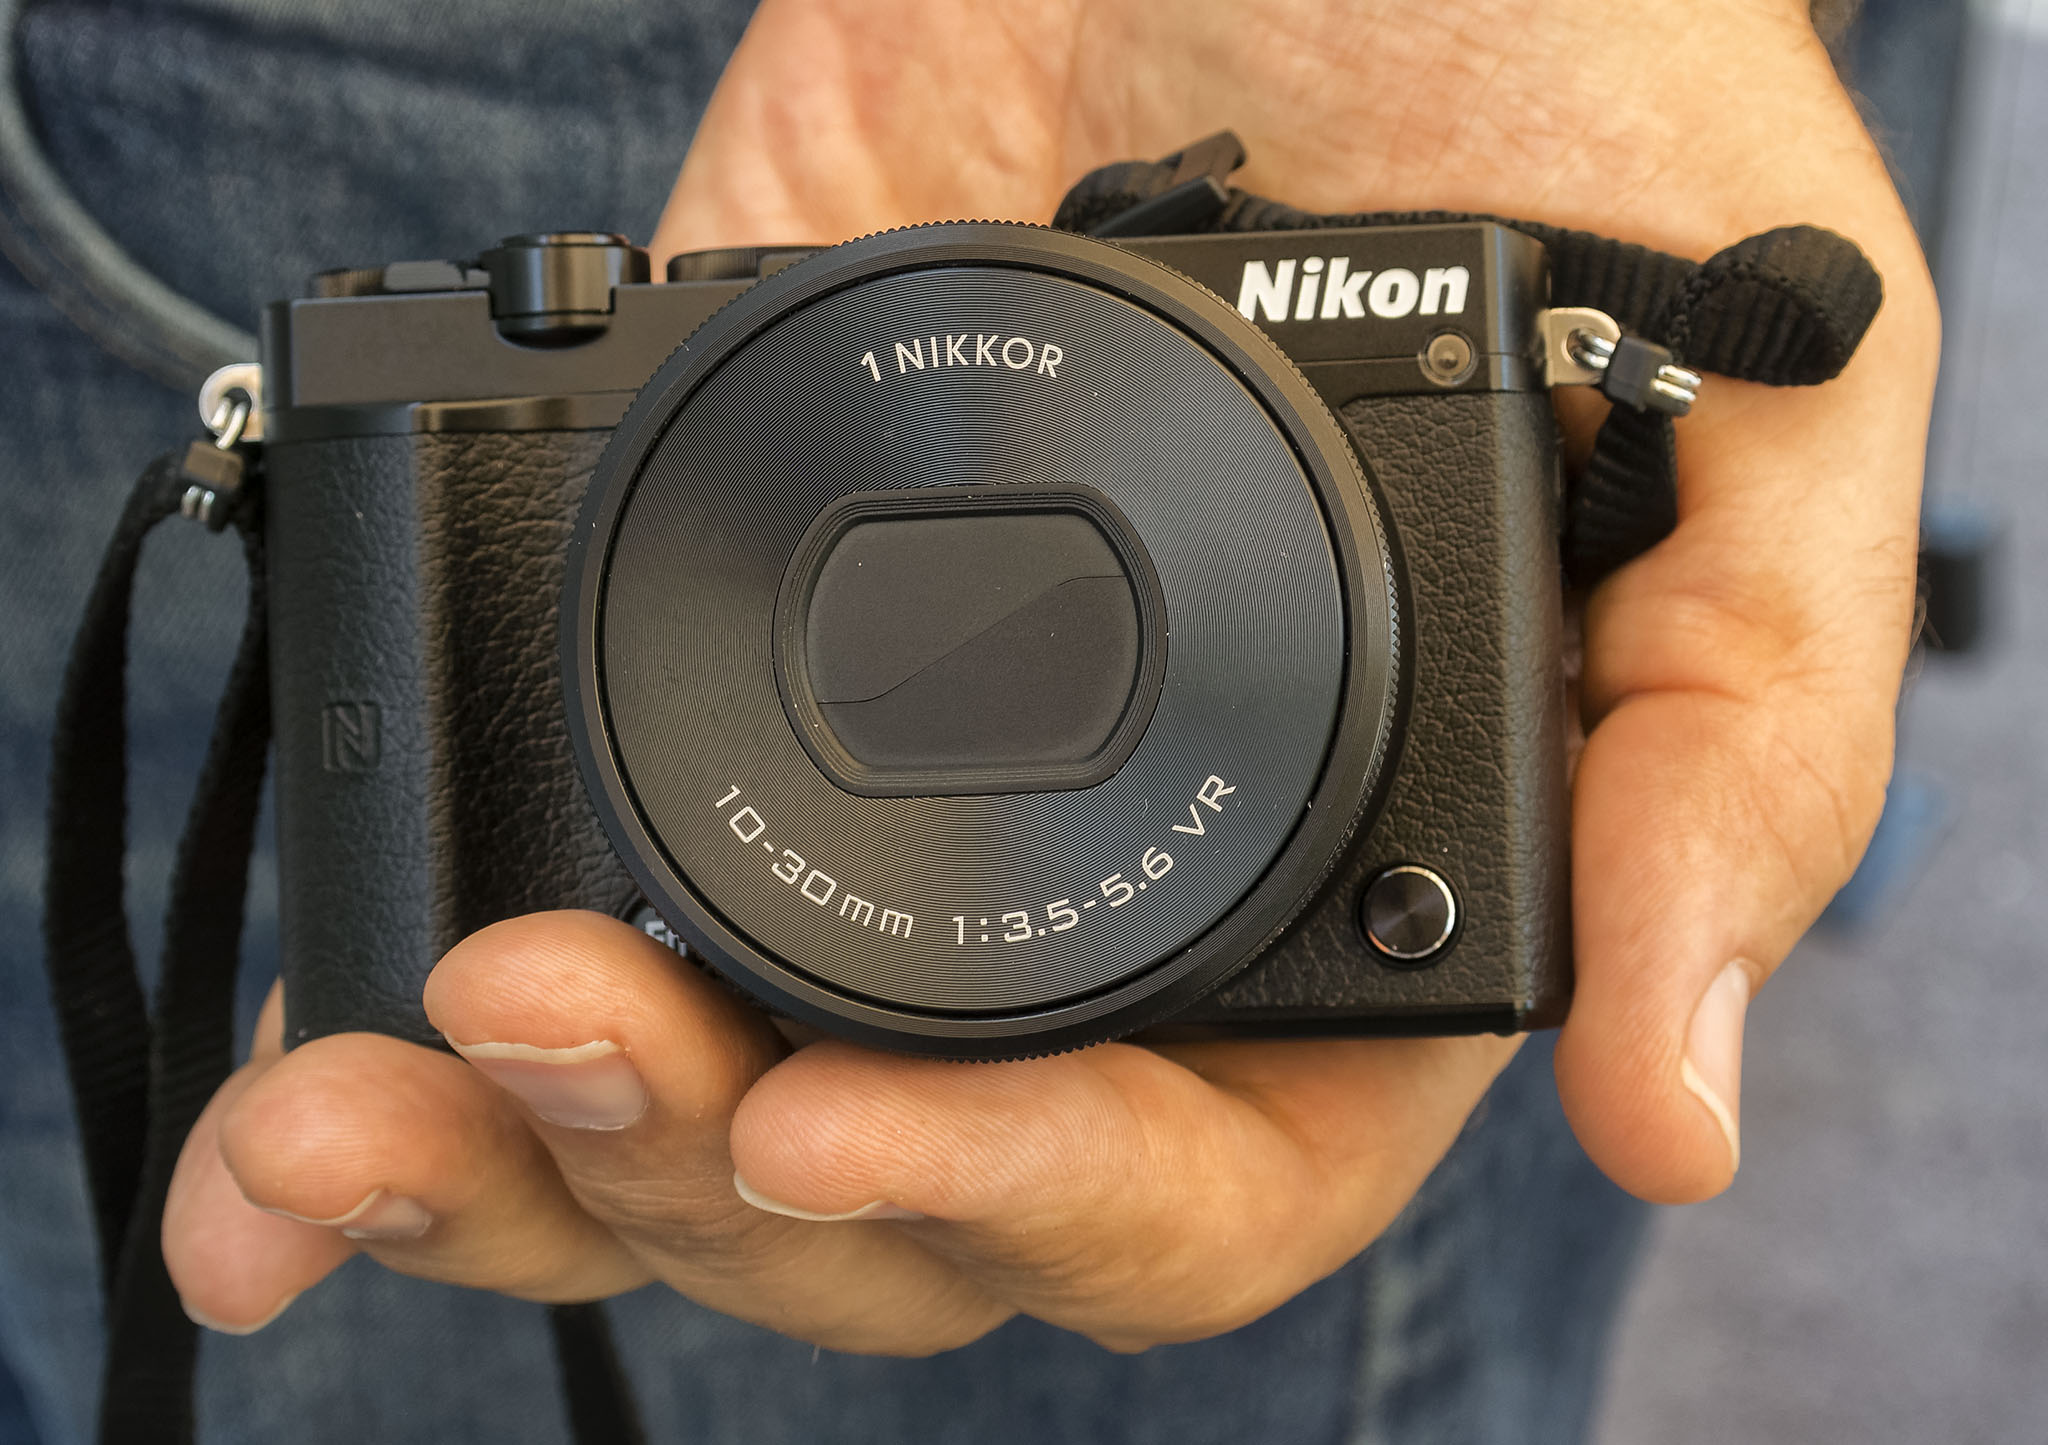 Nikon 1 J5 hands on review